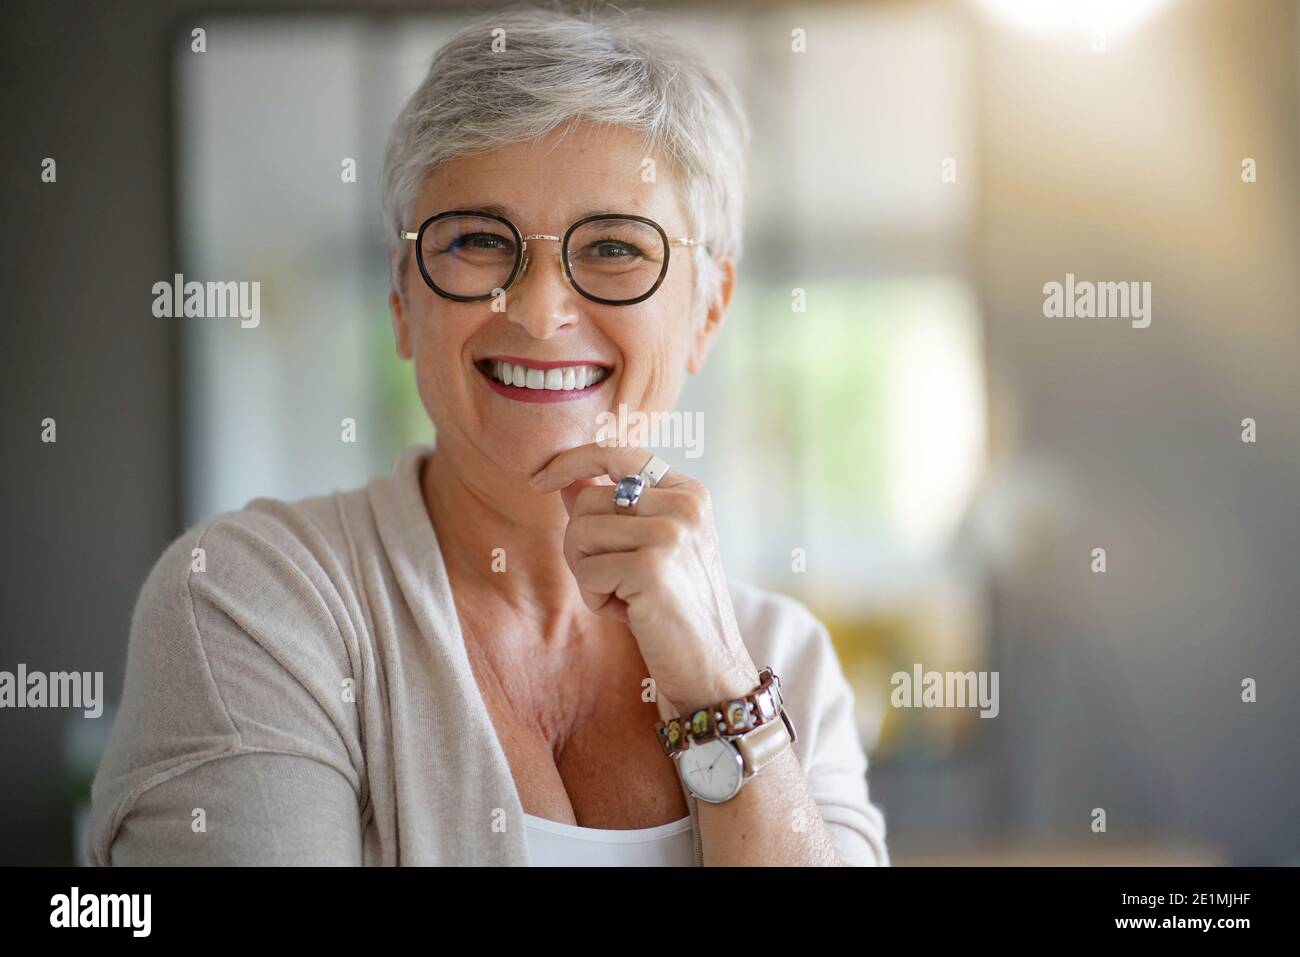 portrait of a beautiful smiling 55 year old woman with white hair Stock Photo